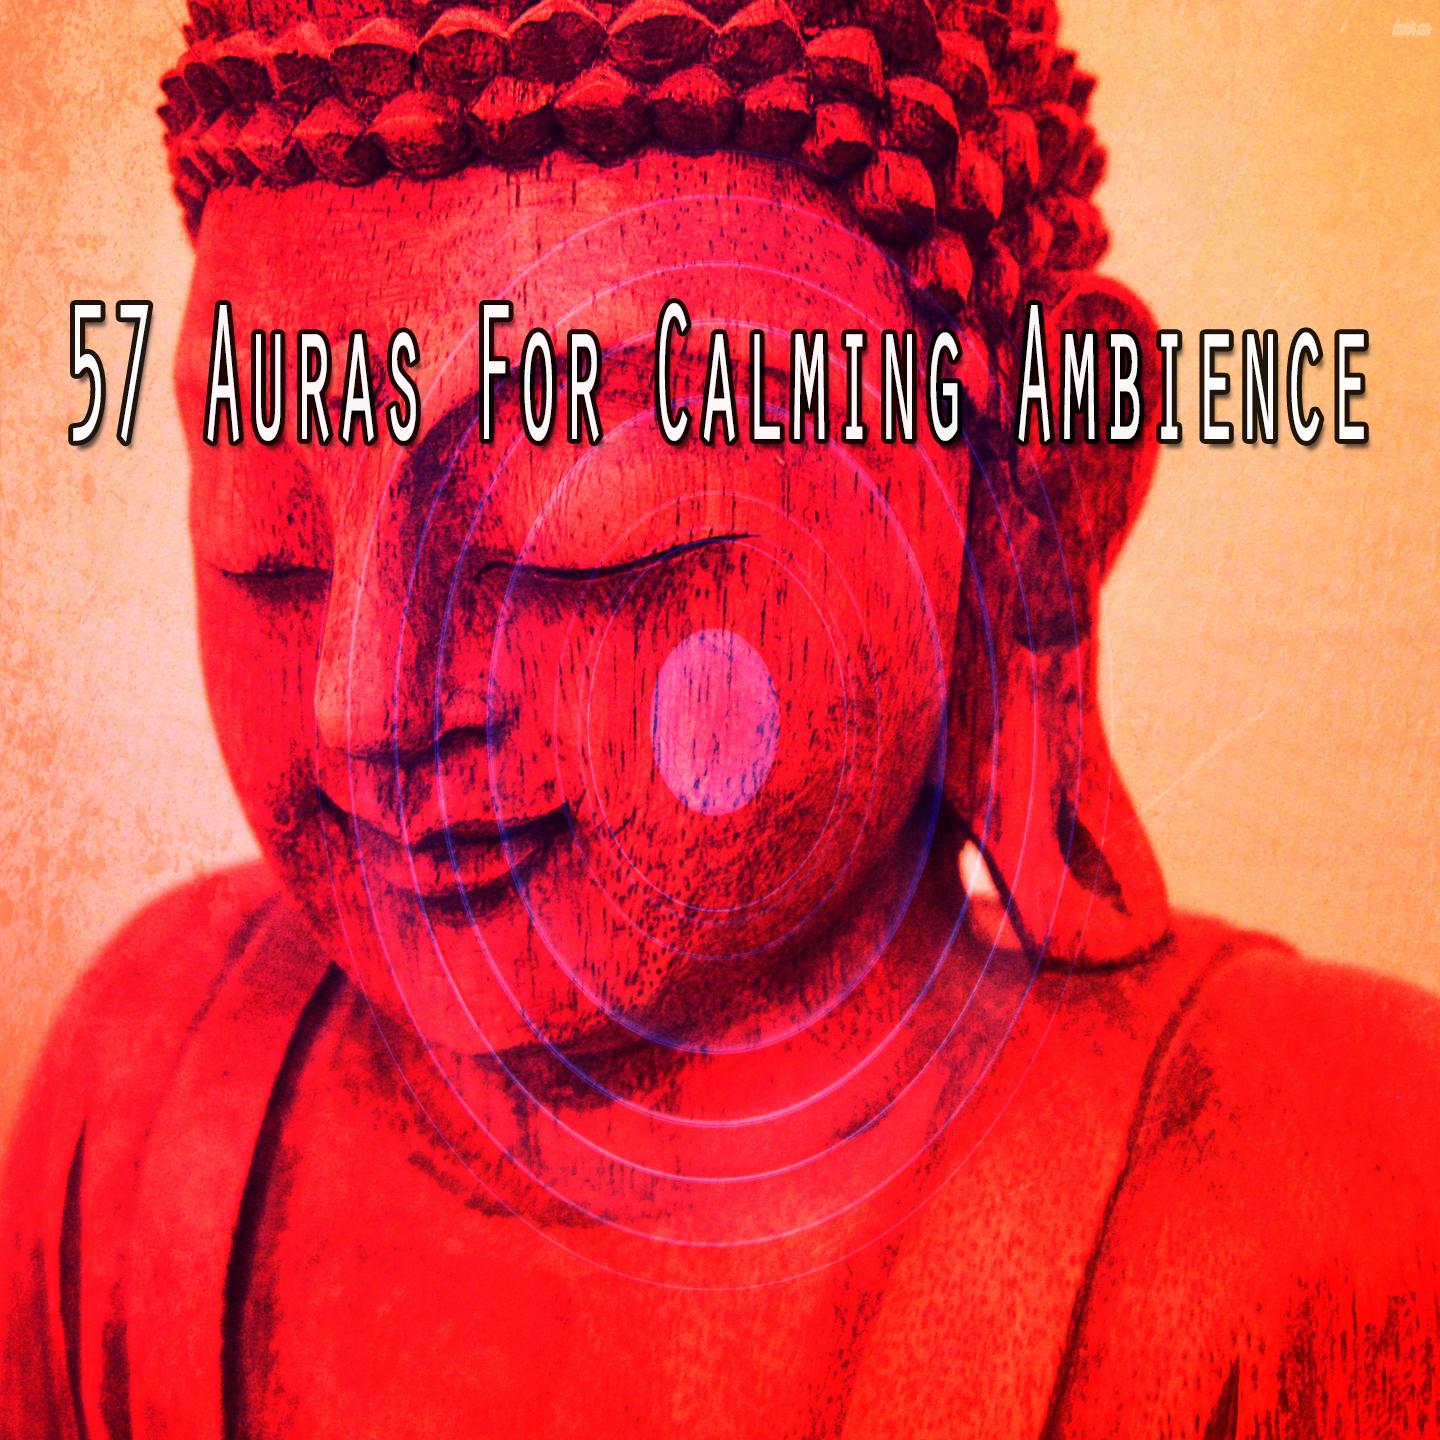 57 Auras for Calming Ambience